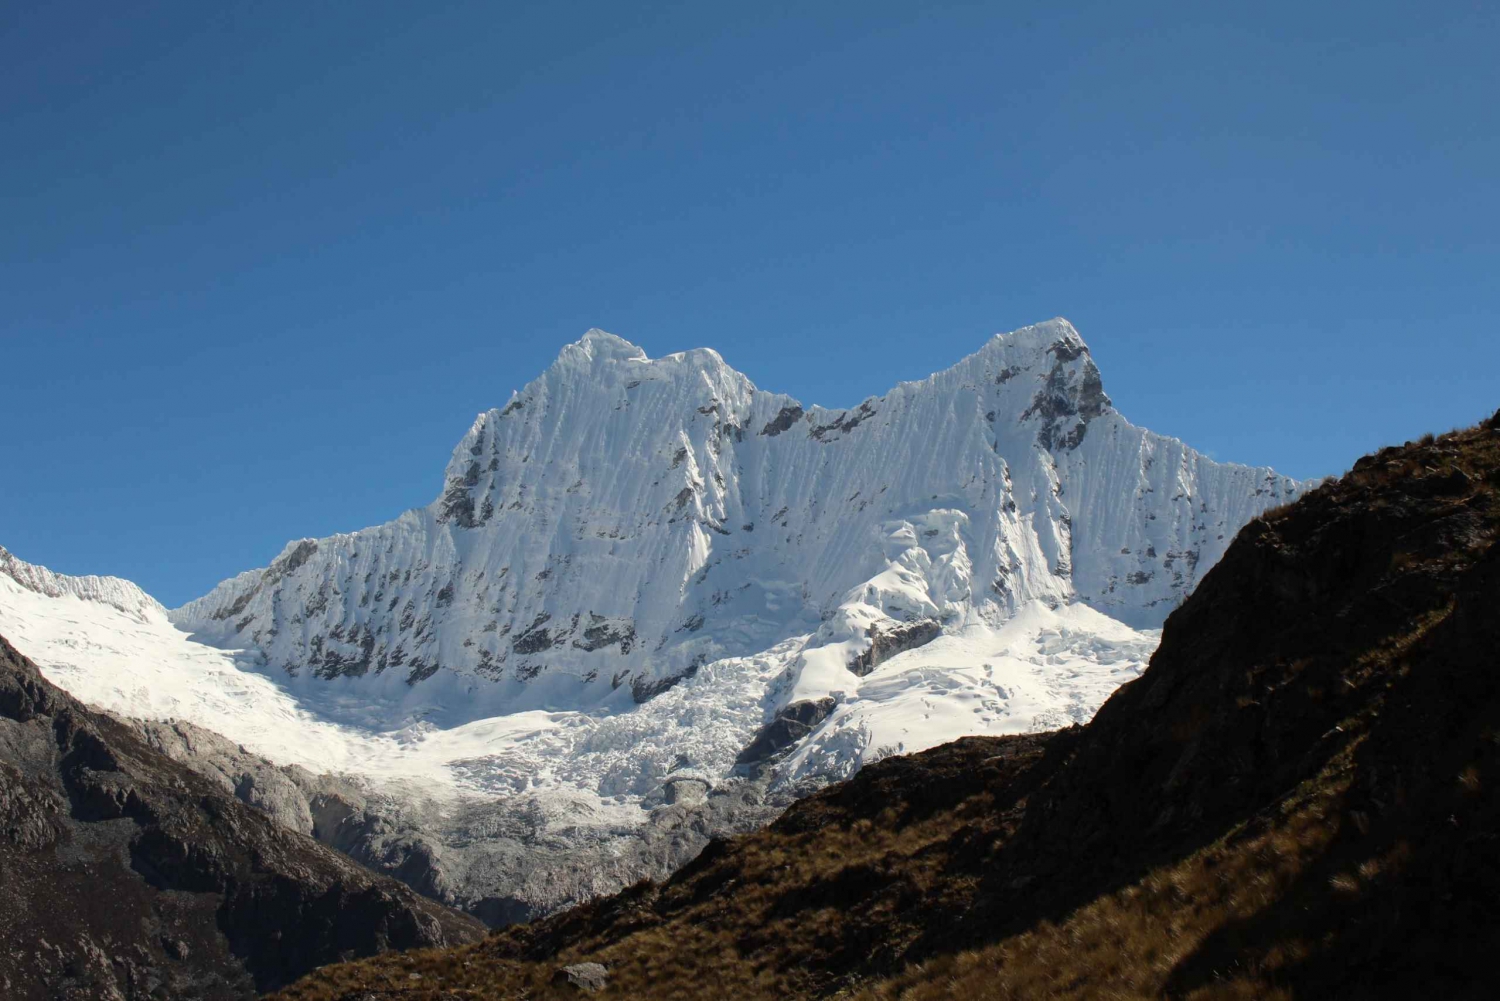 Ancash: Route of the 69 Lagoon - trekking guide |Full day|